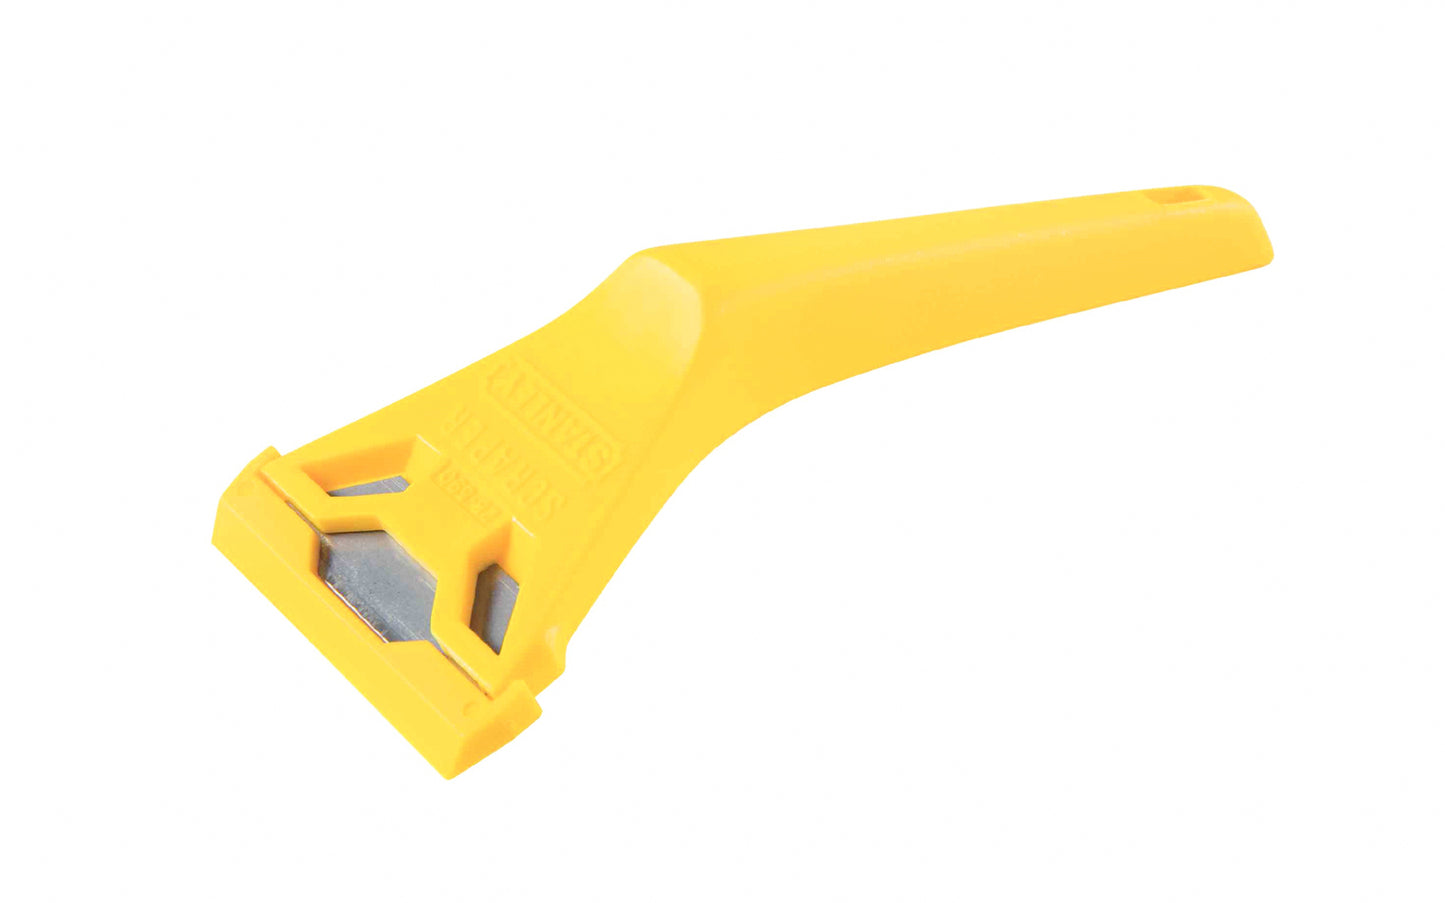 Model No. 28-593.  The Stanley Window Utility Scraper is ideal for scraping paint from windows, mirrors, tiles & other flat surfaces. Comes with one 11-921 utility knife blade. 2-3/8" blade width. Yellow plastic handle. 076174285932.  Made in England.